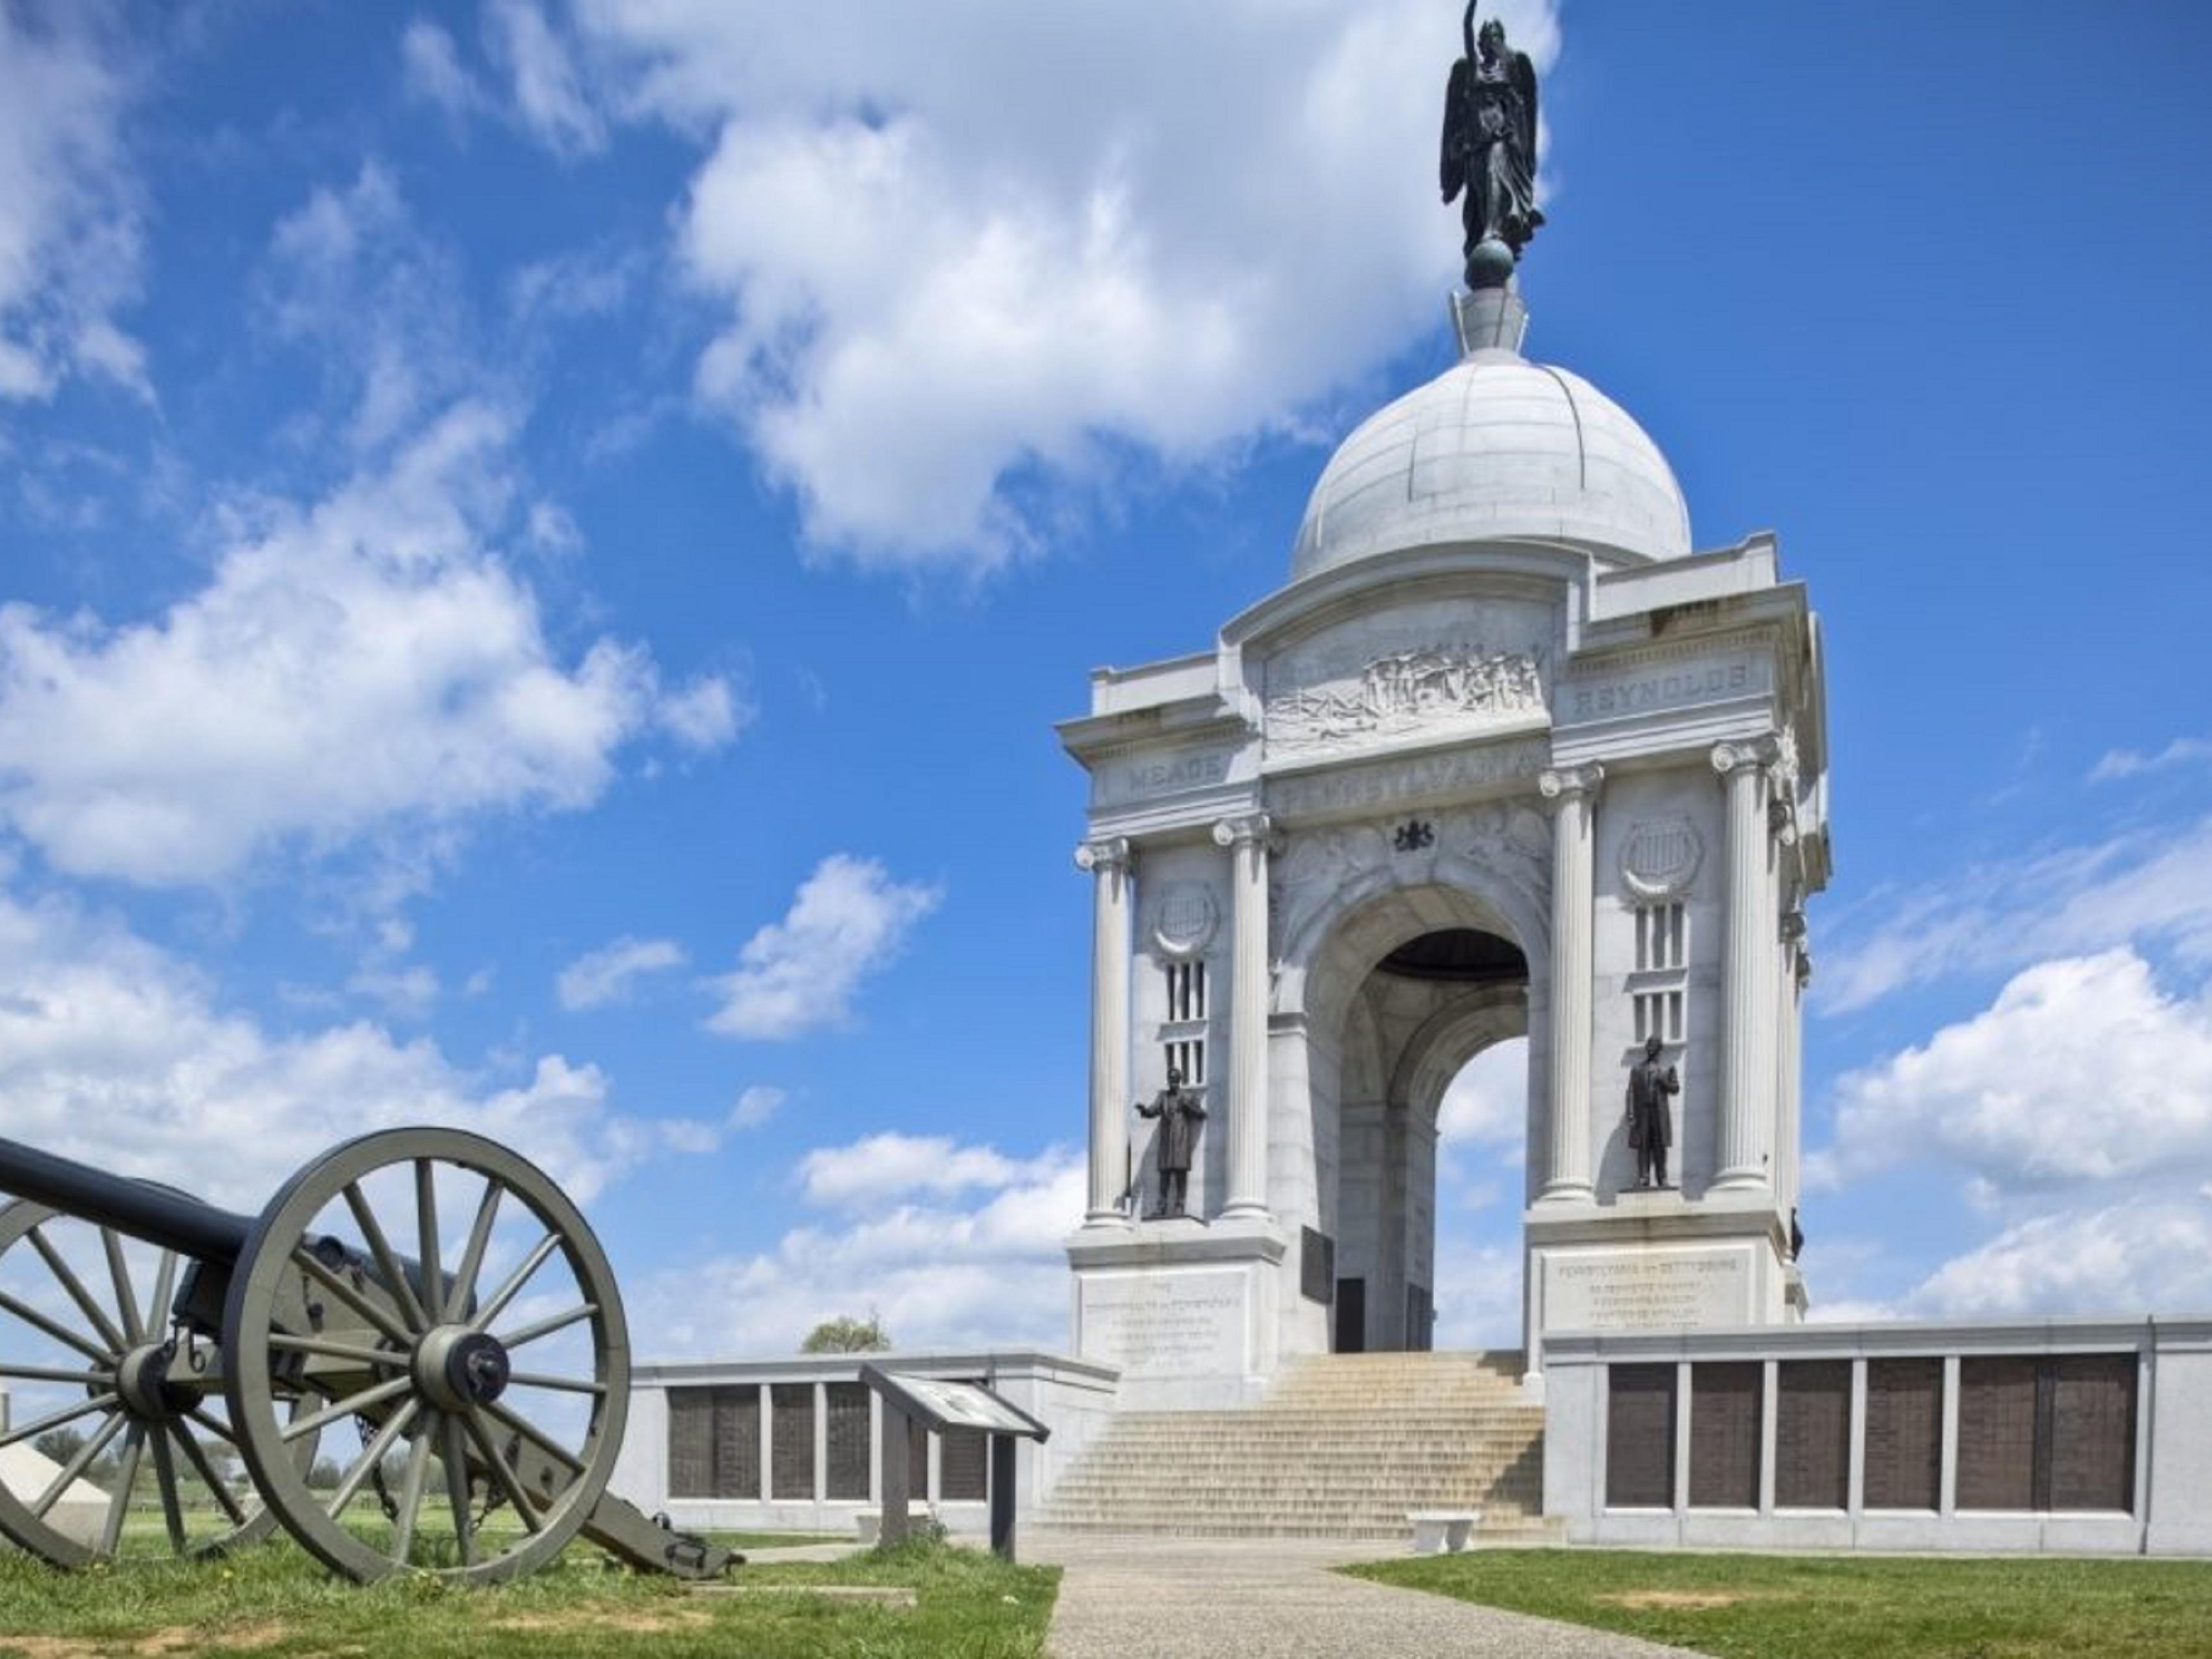 Minutes from the Gettysburg National Military Park and Monuments